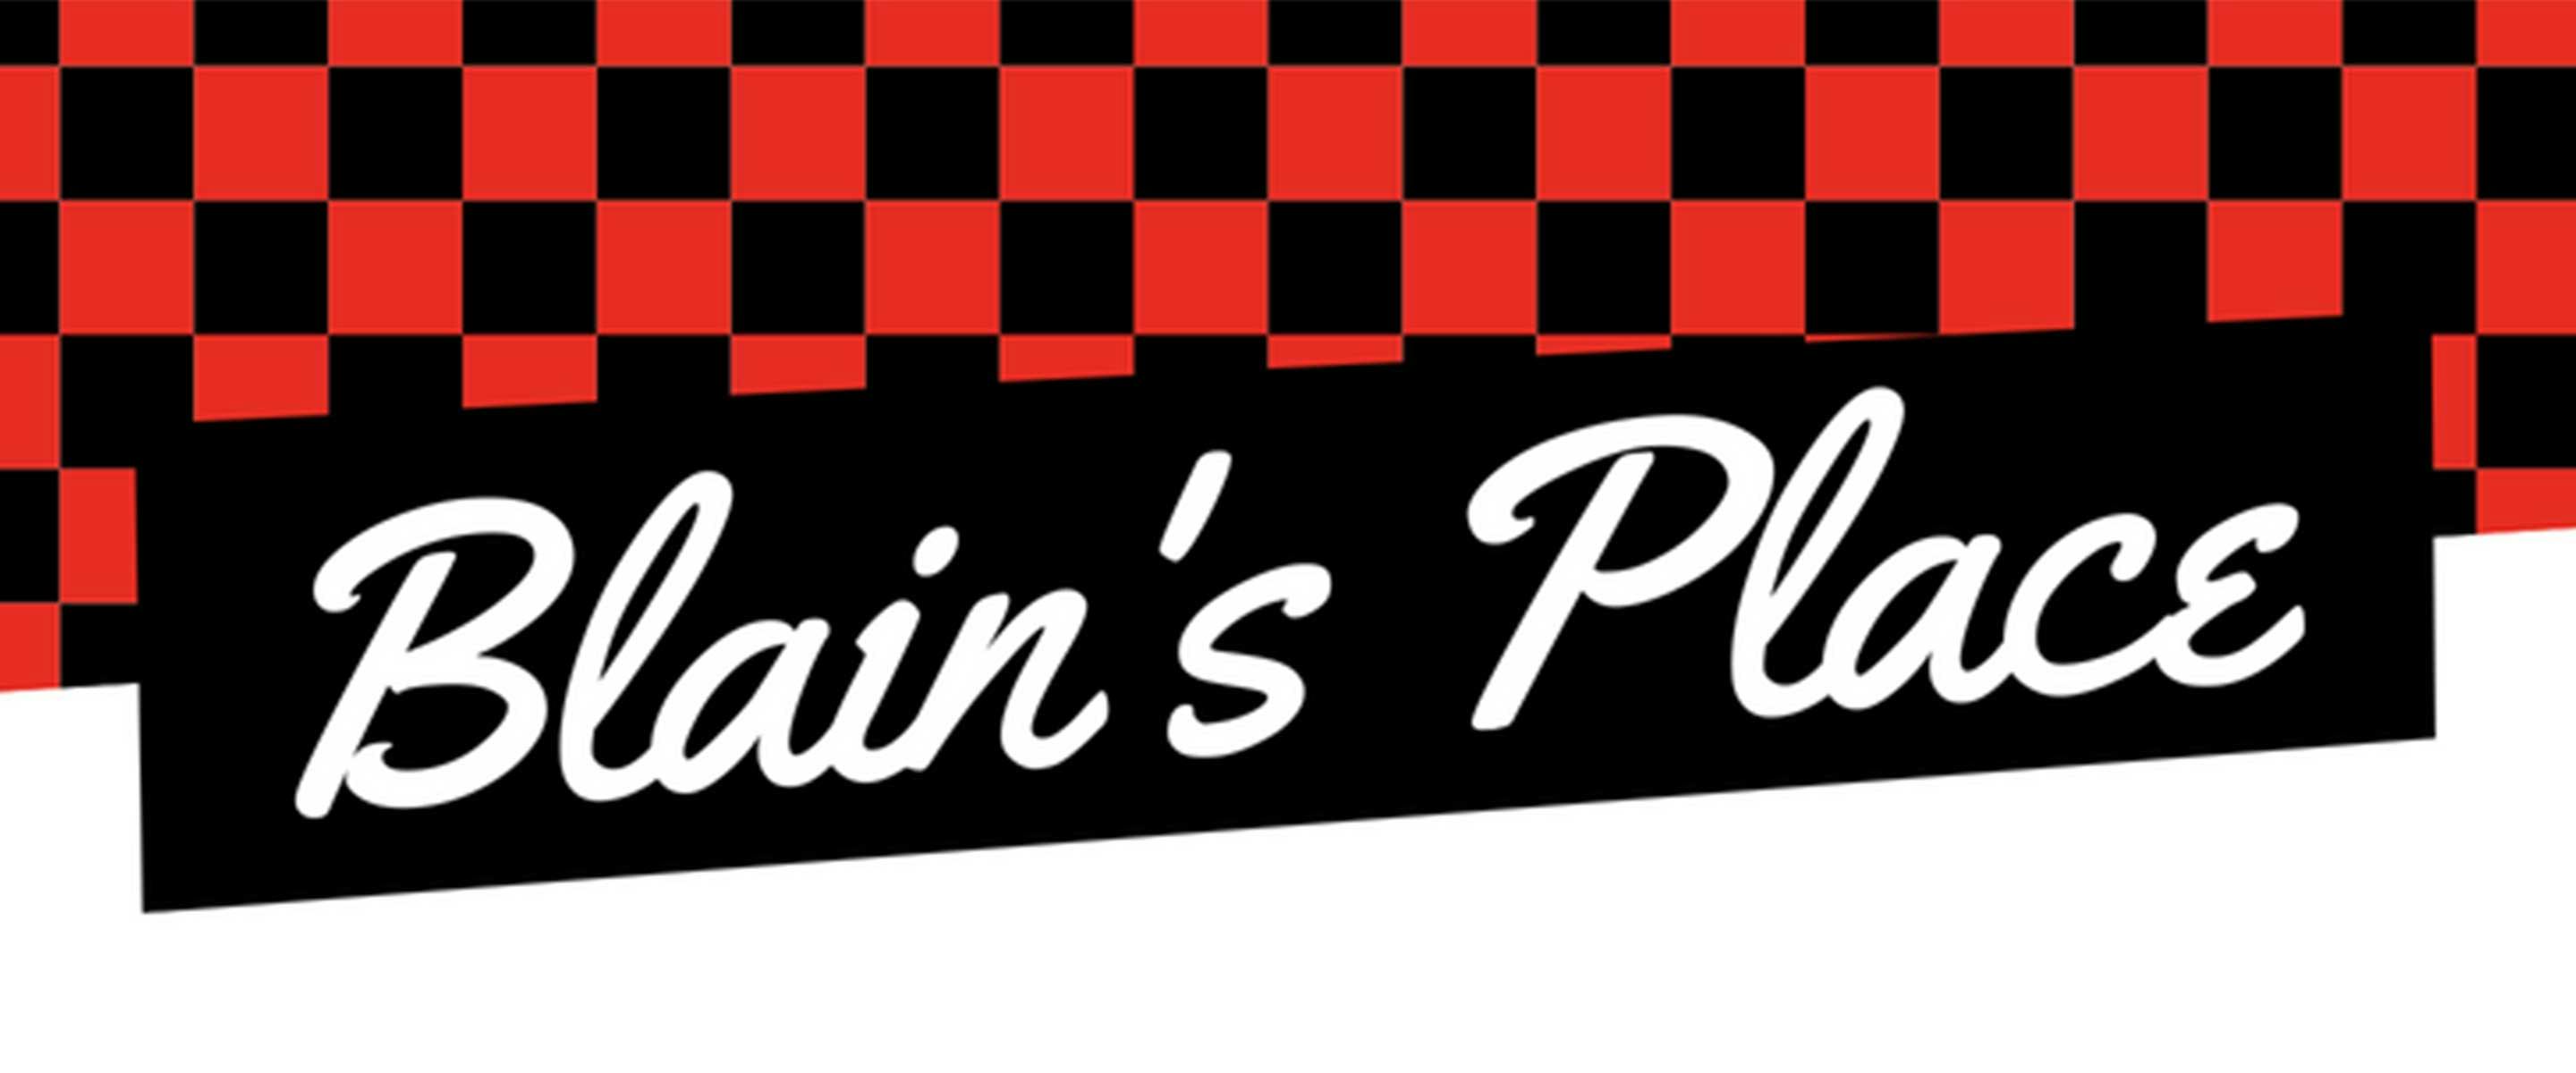 red and black checkered graphic for Blain's Place